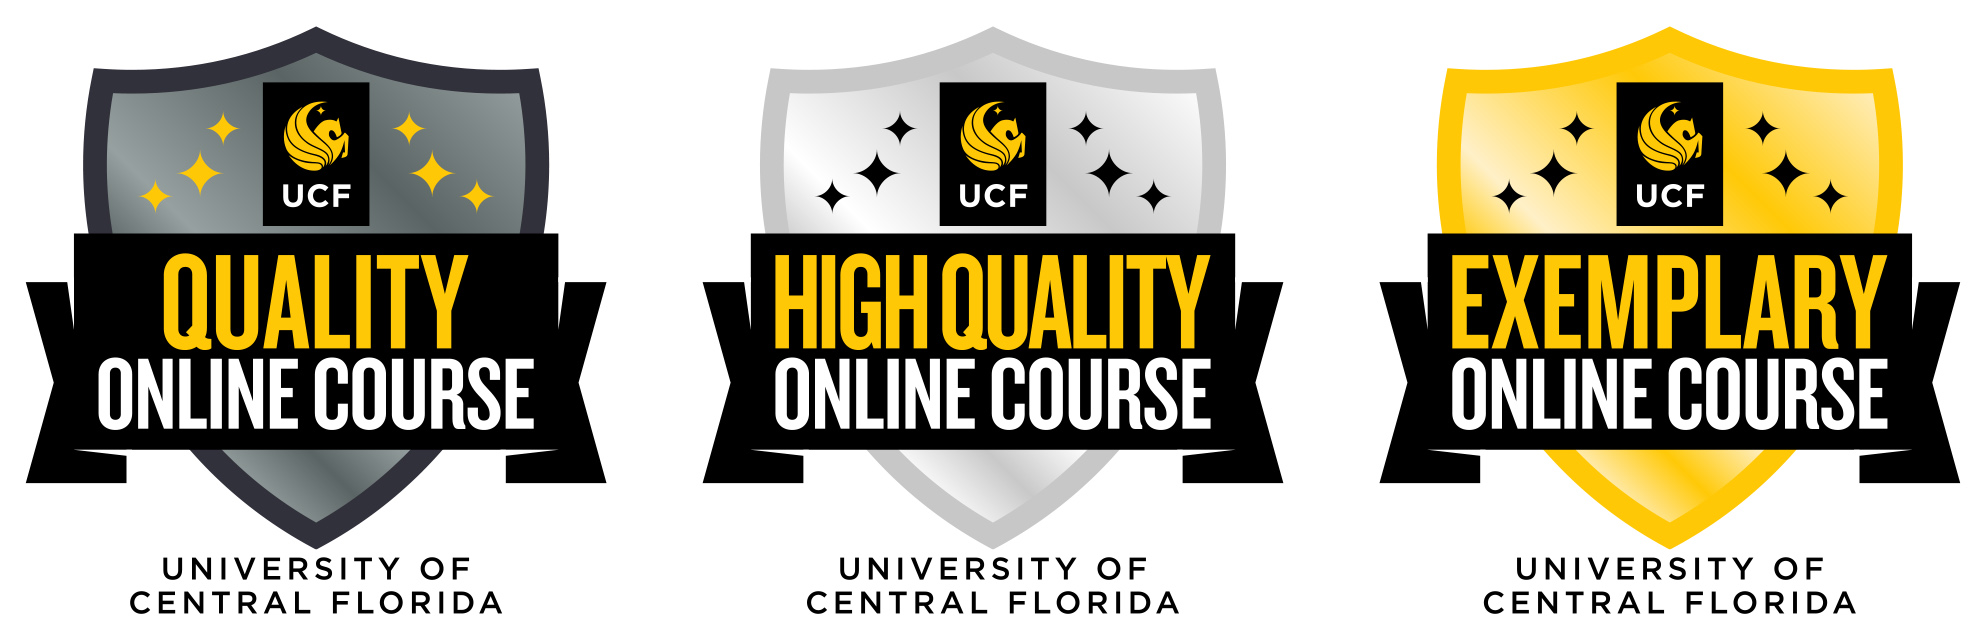 Examples of the digtail badges. Triangle icons with UCF logo, text that says 